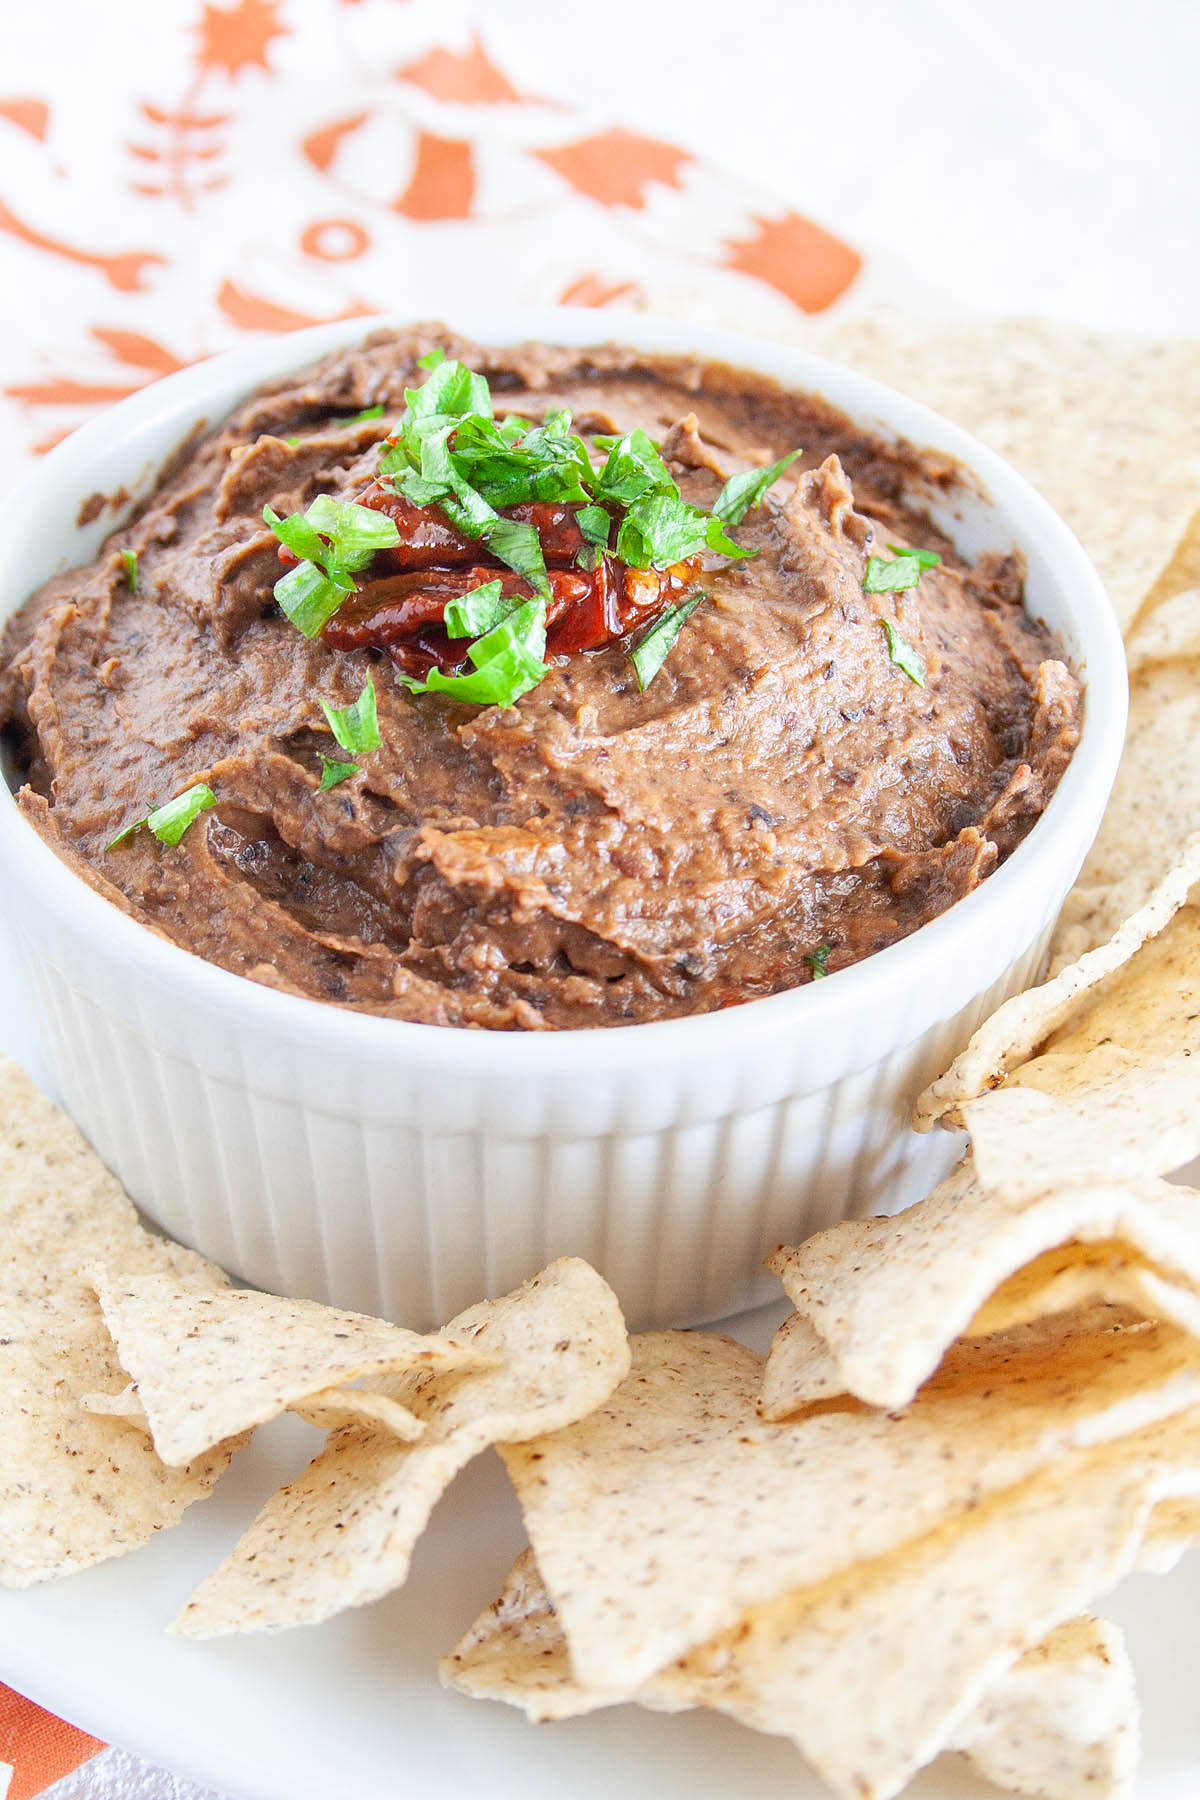 Chipotle Black Bean Dip in a ramekin on a plate with tortilla chips.